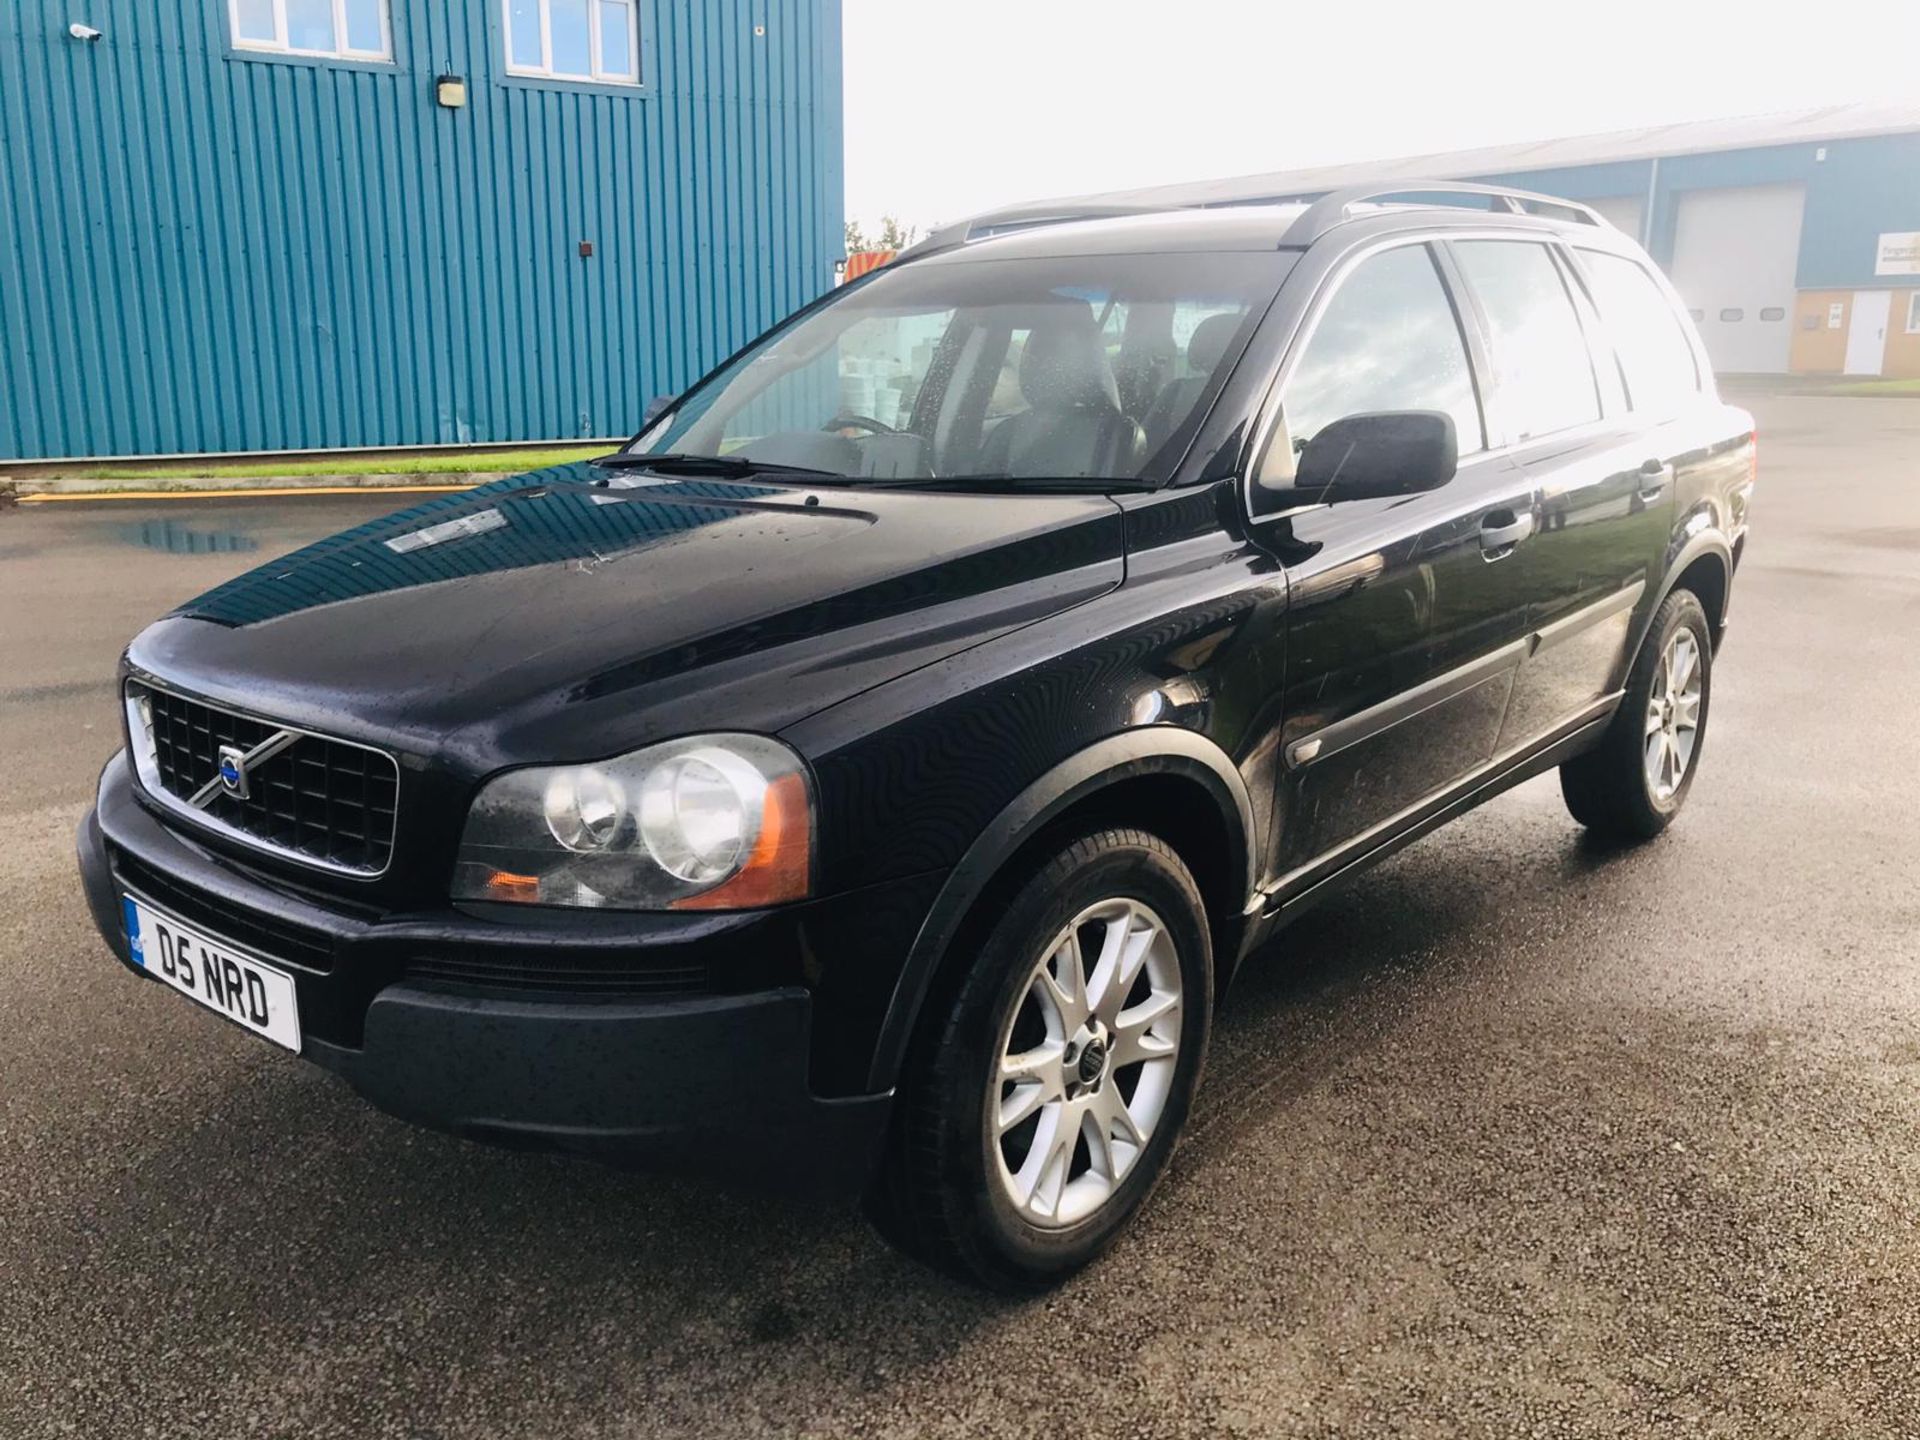 Volvo XC90 2.2 D5 Special Equipment Auto - 2005 Model - 7 Seats - Heated Seats - Tow Pack